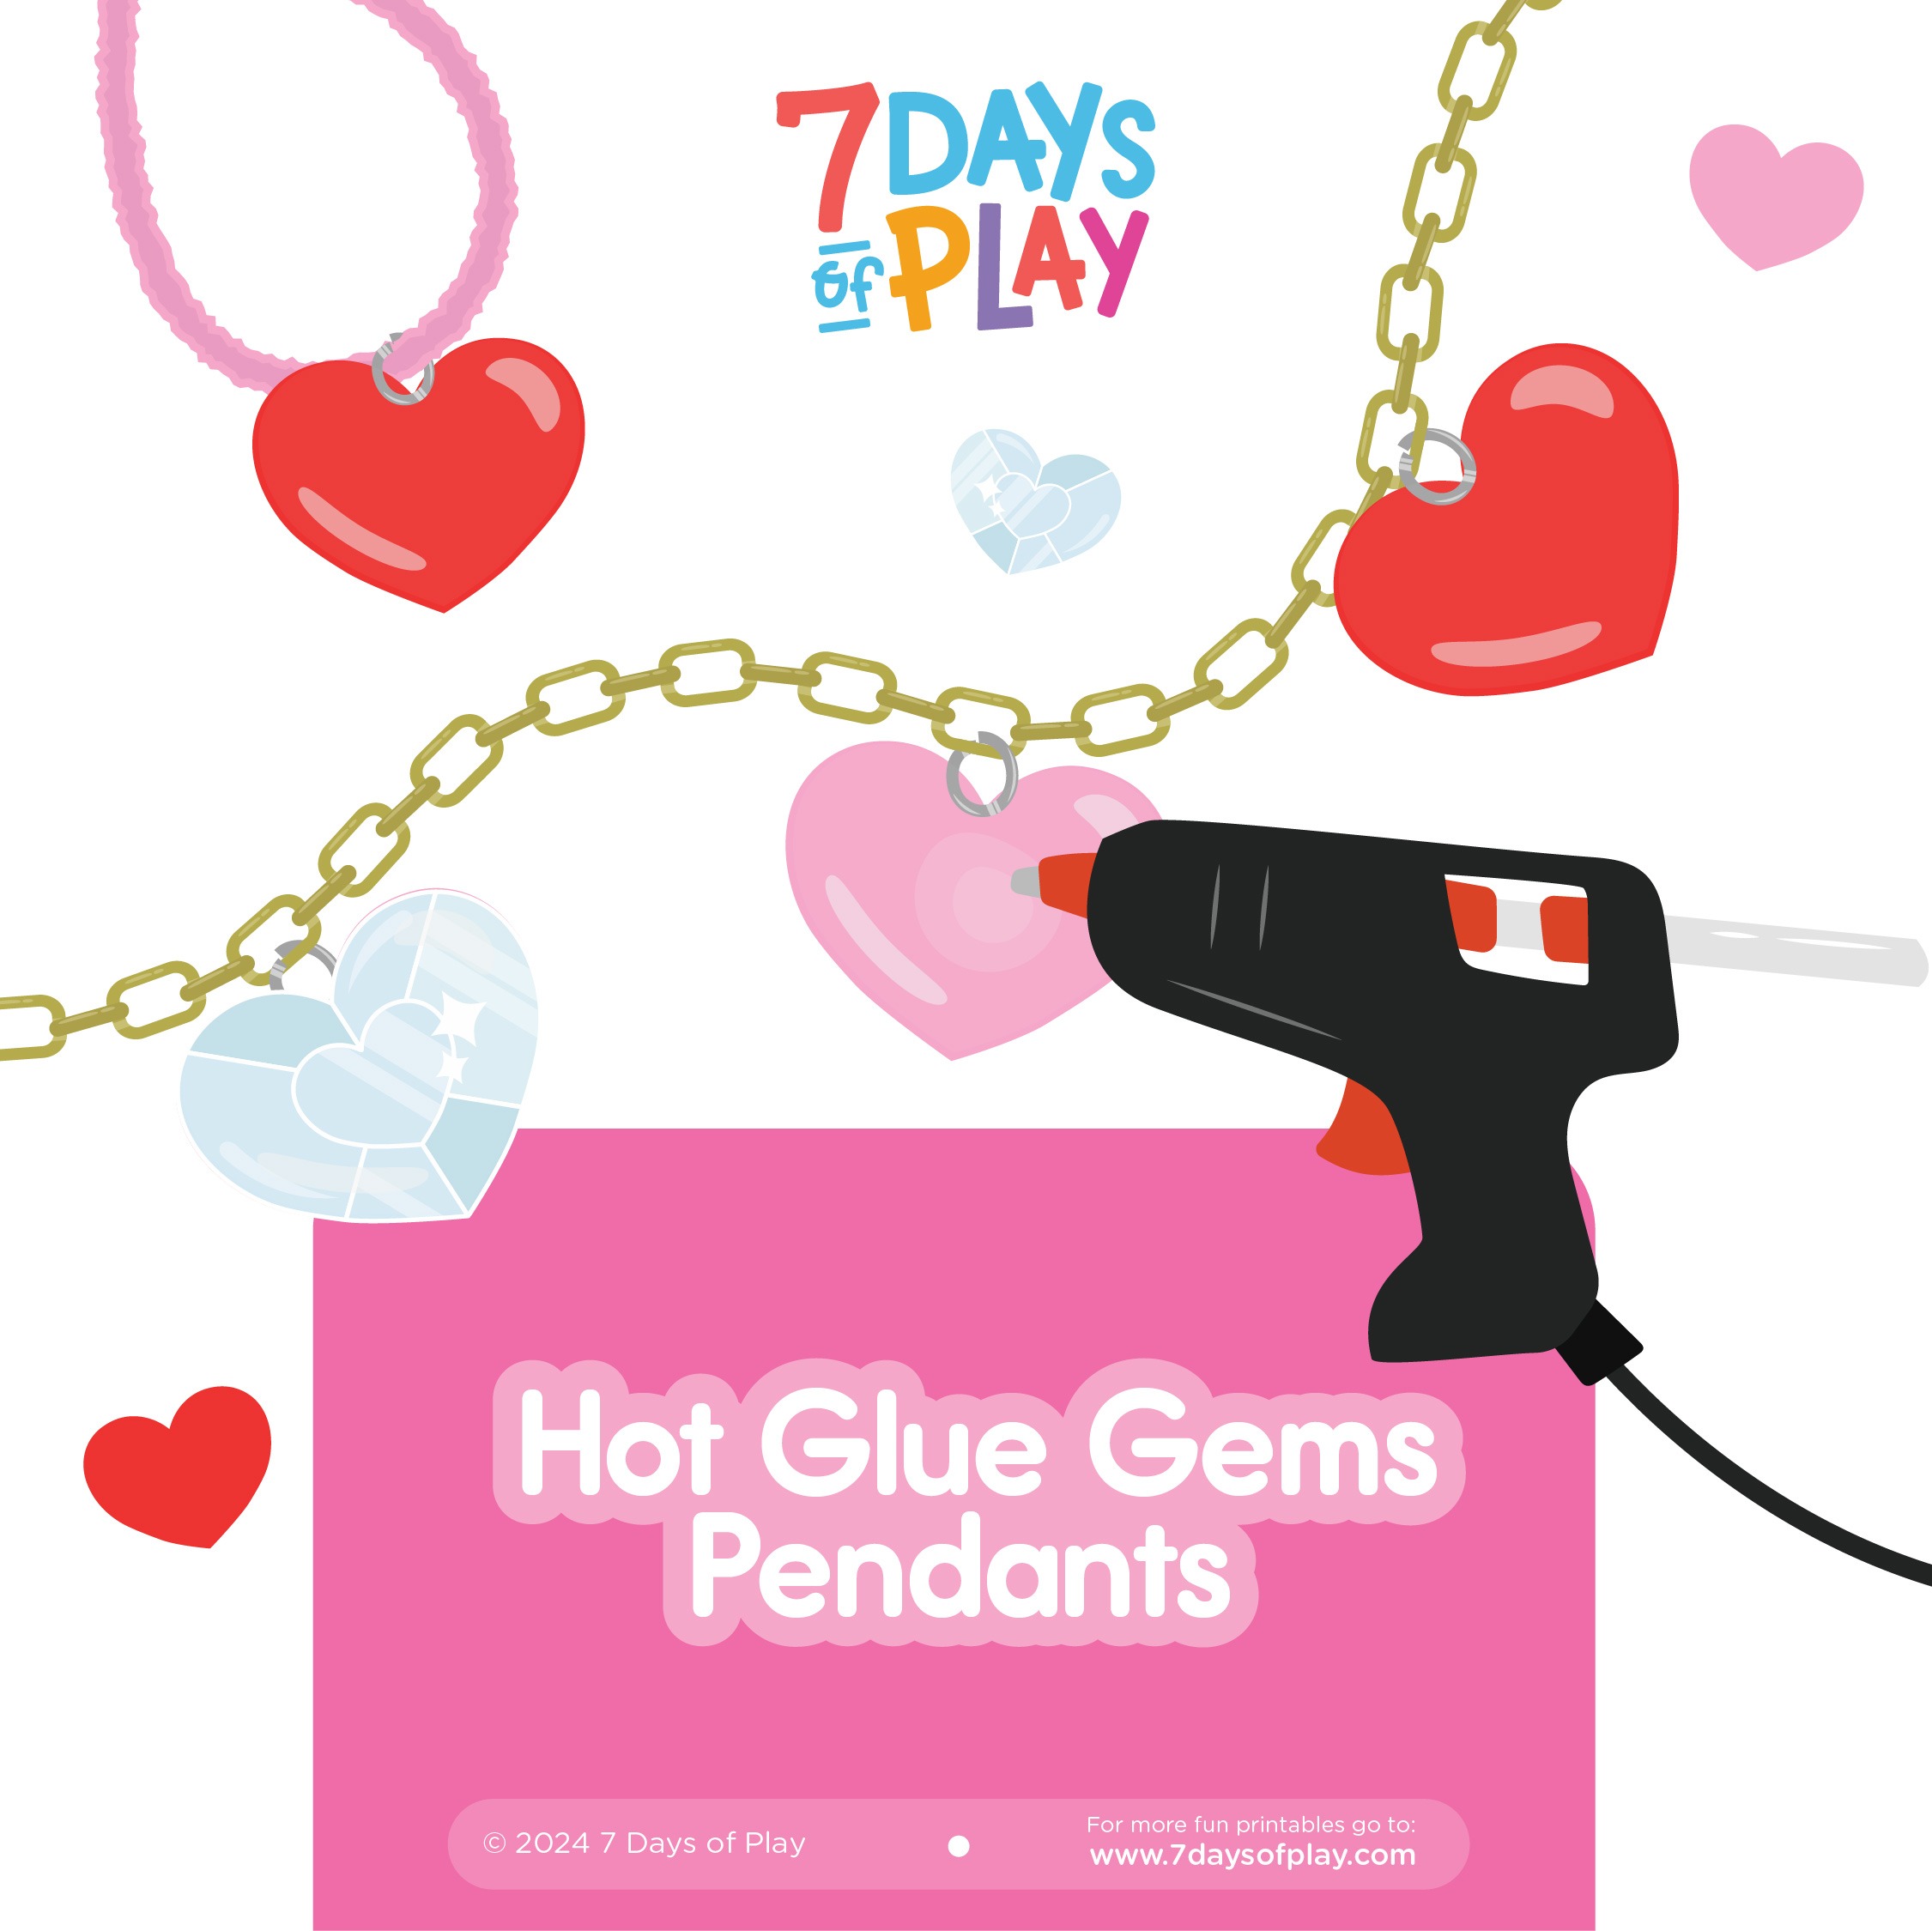 hot glue pendant printable make your own jewlery with hot glue